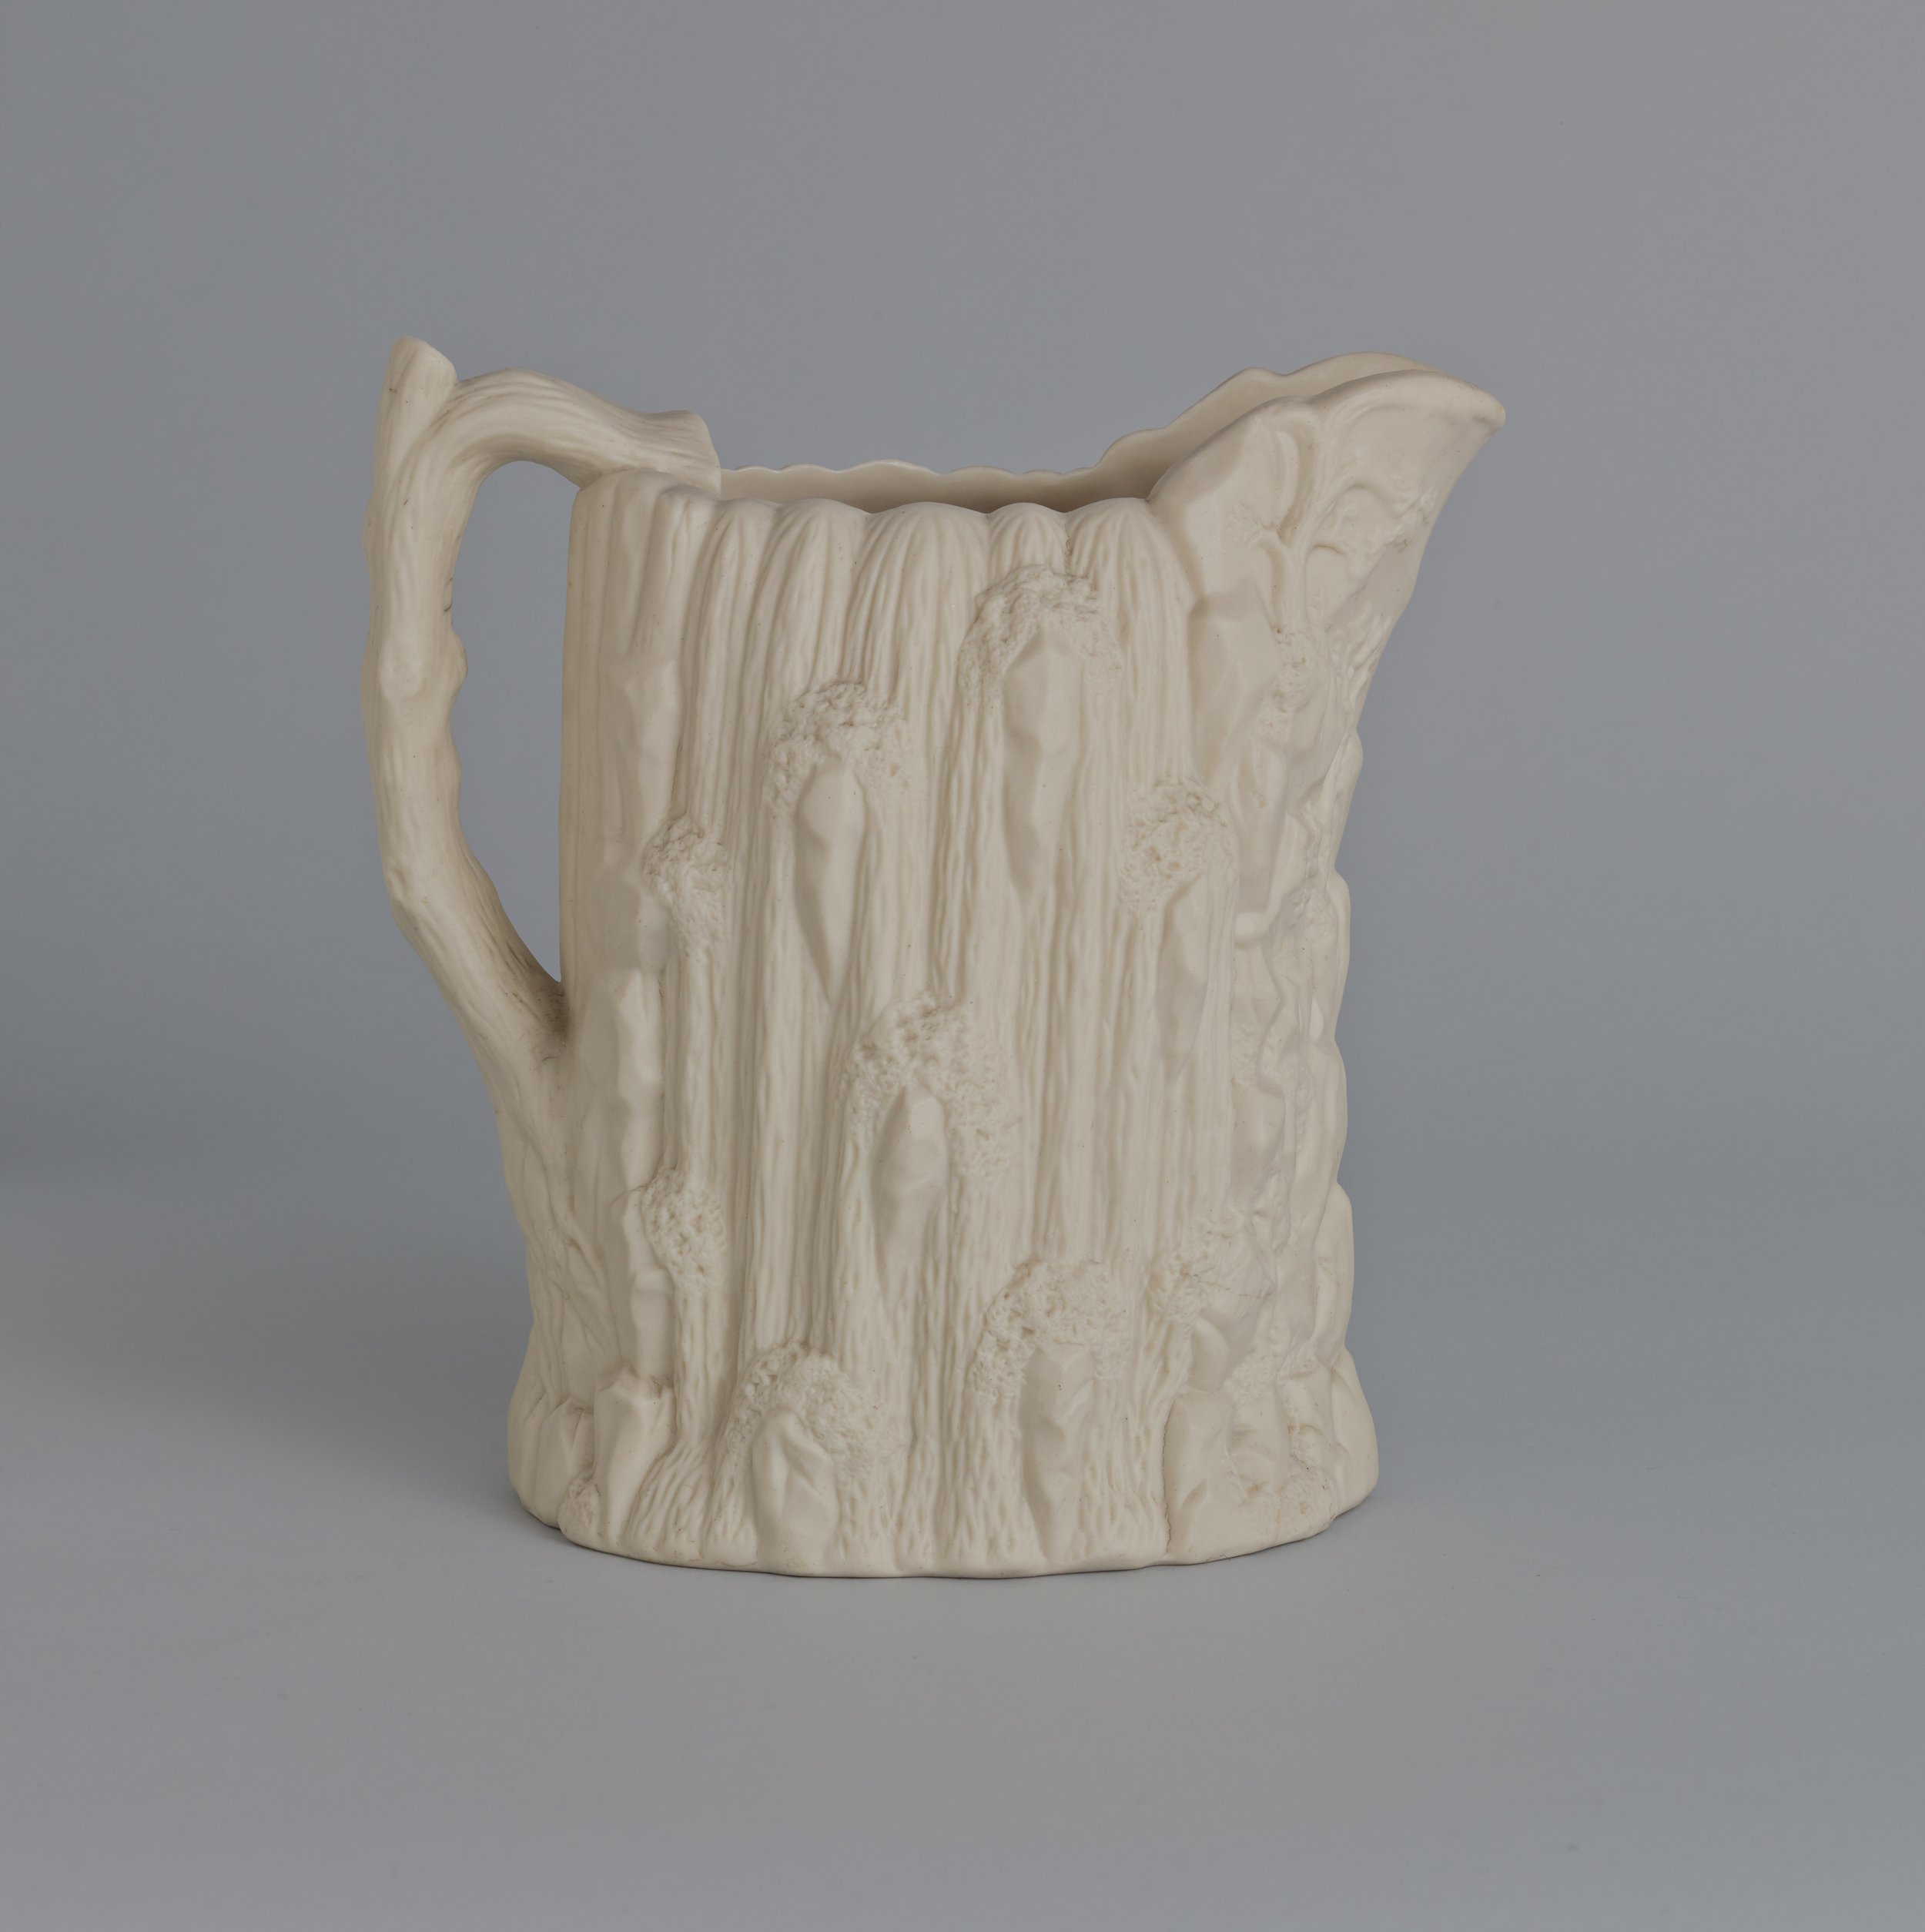   United States Pottery Company   United States, established 1849–1858  Niagara Falls Pitcher , 1852–1858 Parian porcelain, 8 3/8 x 6 1/4 x 5 3/4 inches Gift of Mr. and Mrs. Edwin R. Metcalf, 1981.53 